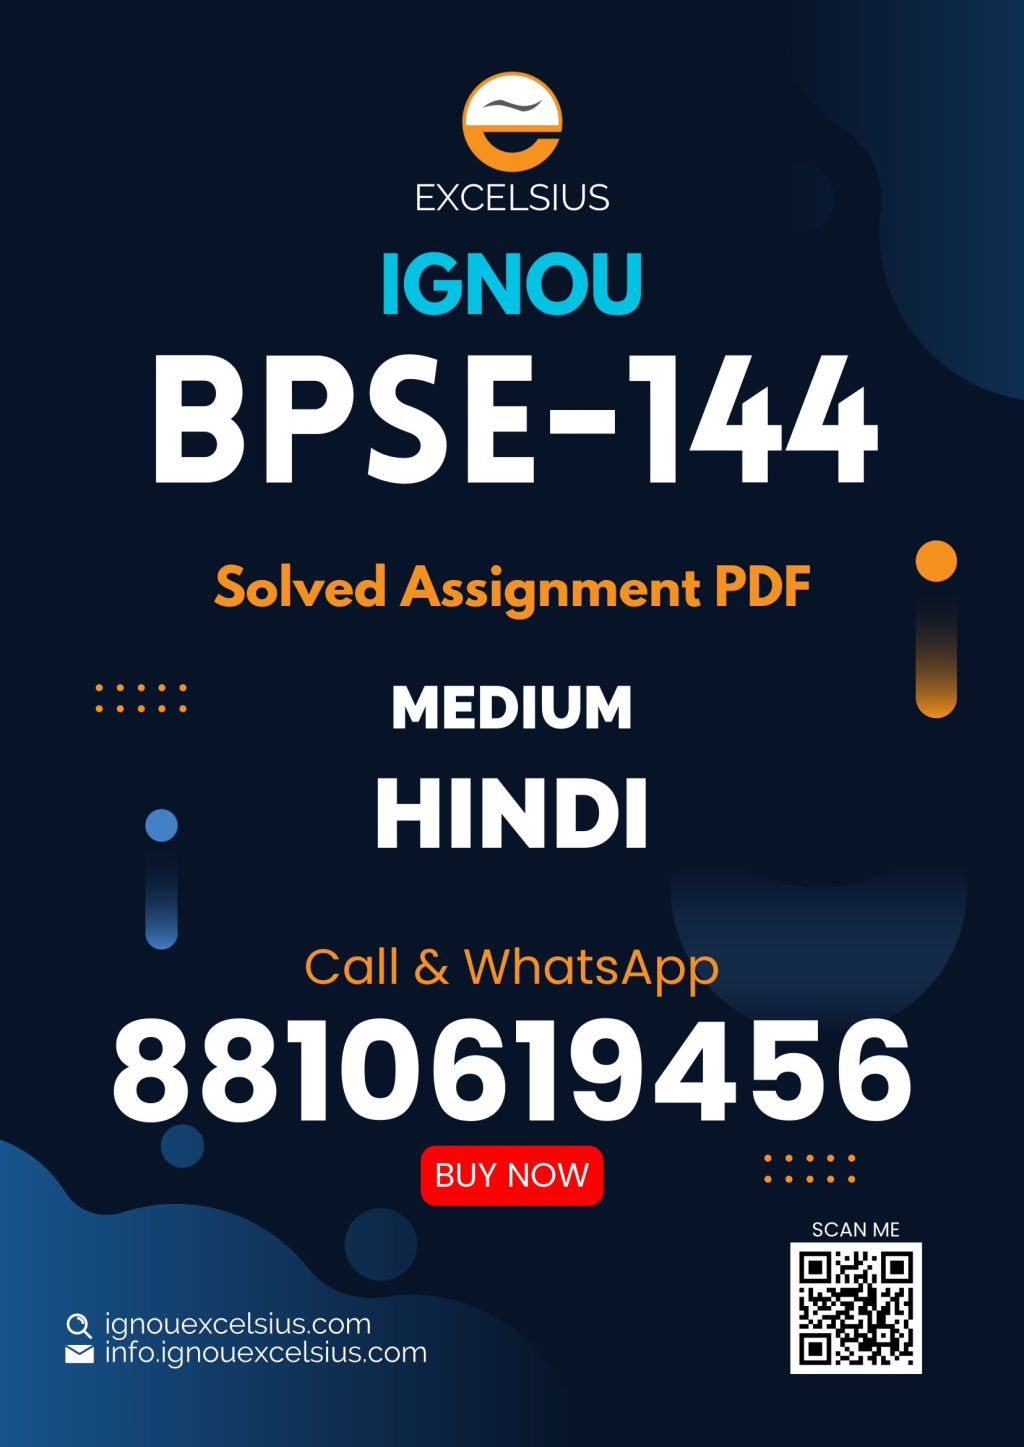 IGNOU BPSE-144 - Introduction to South Asia, Latest Solved Assignment-July 2022 – January 2023